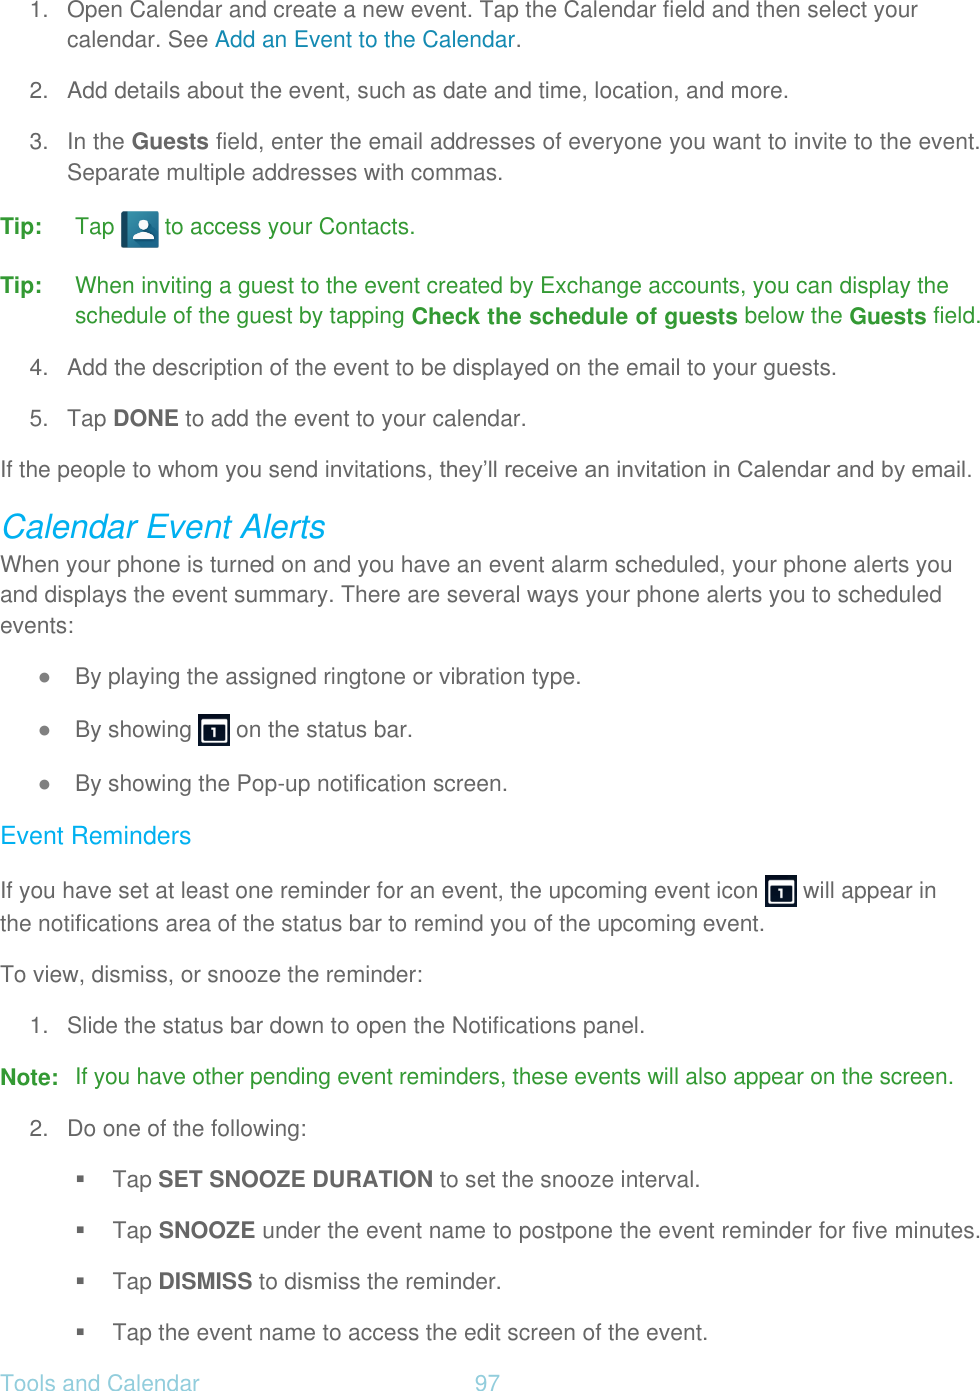 Tools and Calendar  97   1.  Open Calendar and create a new event. Tap the Calendar field and then select your calendar. See Add an Event to the Calendar. 2.  Add details about the event, such as date and time, location, and more. 3.  In the Guests field, enter the email addresses of everyone you want to invite to the event. Separate multiple addresses with commas. Tip: Tap   to access your Contacts. Tip: When inviting a guest to the event created by Exchange accounts, you can display the schedule of the guest by tapping Check the schedule of guests below the Guests field. 4.  Add the description of the event to be displayed on the email to your guests. 5. Tap DONE to add the event to your calendar. If the people to whom you send invitations, they’ll receive an invitation in Calendar and by email. Calendar Event Alerts When your phone is turned on and you have an event alarm scheduled, your phone alerts you and displays the event summary. There are several ways your phone alerts you to scheduled events: ● By playing the assigned ringtone or vibration type. ● By showing   on the status bar. ● By showing the Pop-up notification screen. Event Reminders If you have set at least one reminder for an event, the upcoming event icon   will appear in the notifications area of the status bar to remind you of the upcoming event. To view, dismiss, or snooze the reminder: 1.  Slide the status bar down to open the Notifications panel. Note:  If you have other pending event reminders, these events will also appear on the screen. 2.  Do one of the following:  Tap SET SNOOZE DURATION to set the snooze interval.   Tap SNOOZE under the event name to postpone the event reminder for five minutes.  Tap DISMISS to dismiss the reminder.   Tap the event name to access the edit screen of the event. 